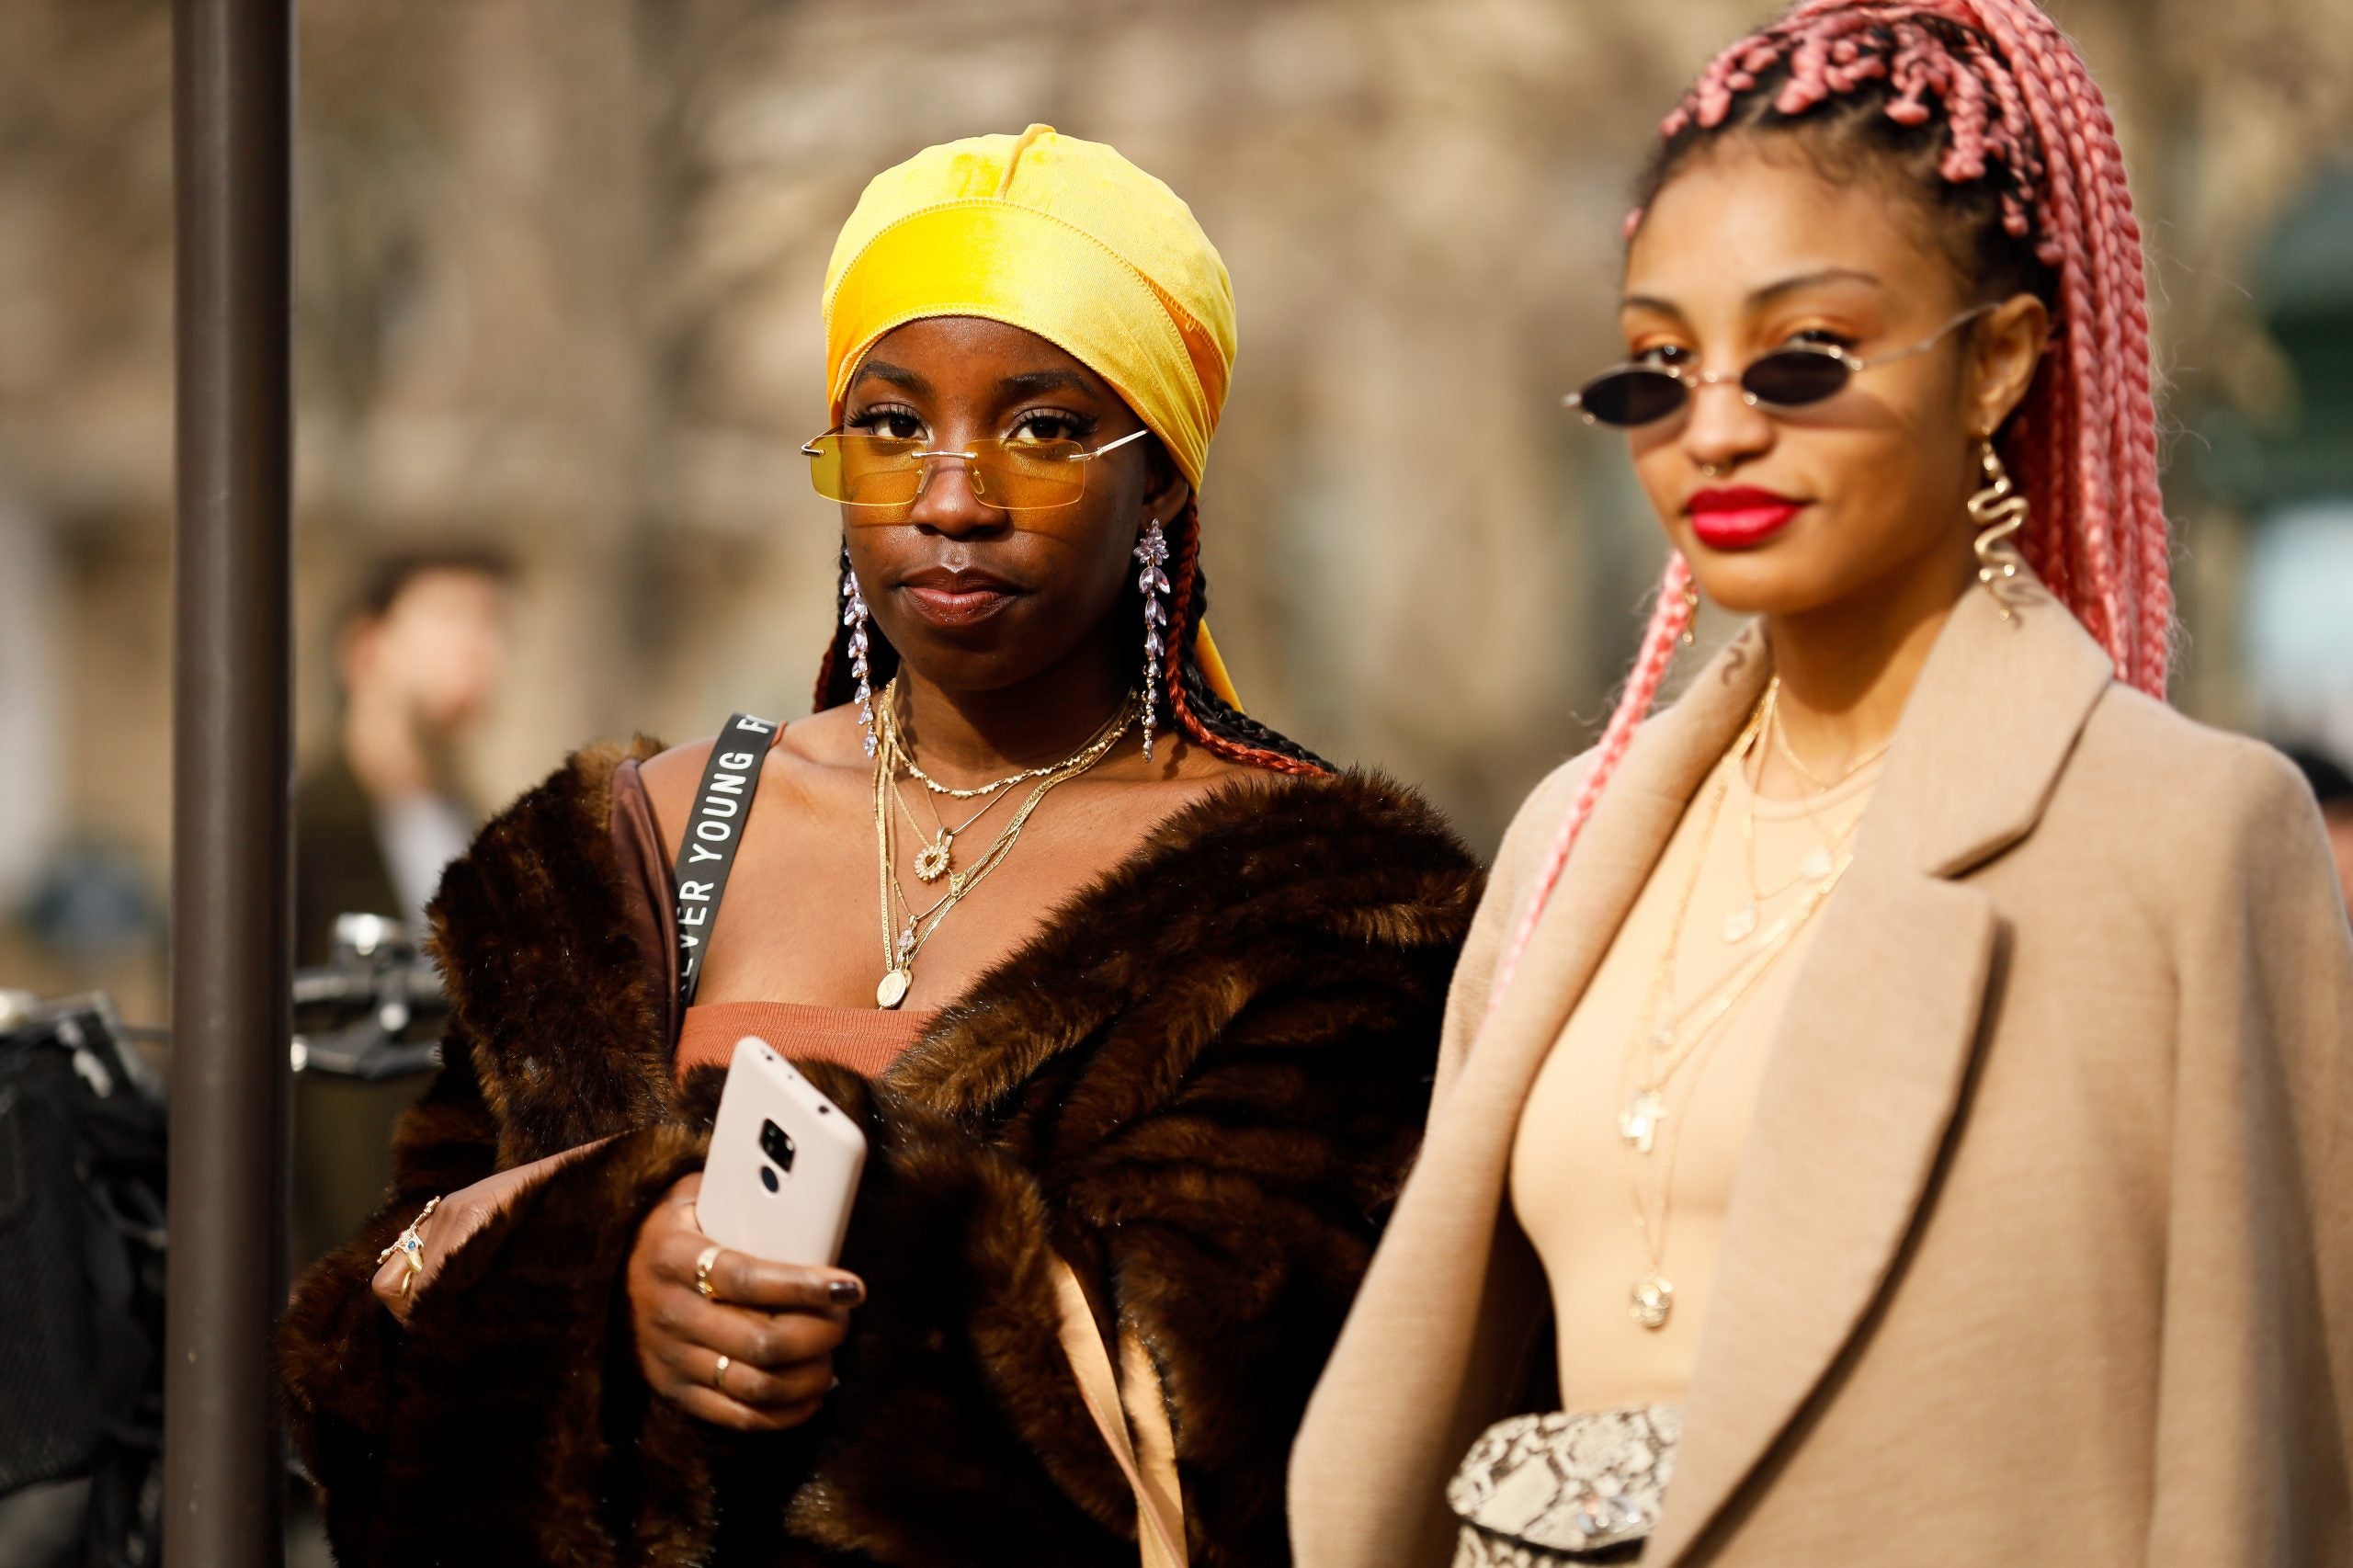 ICYMI: Natural Curls And Braids Dominated The Front Rows This Fashion Season